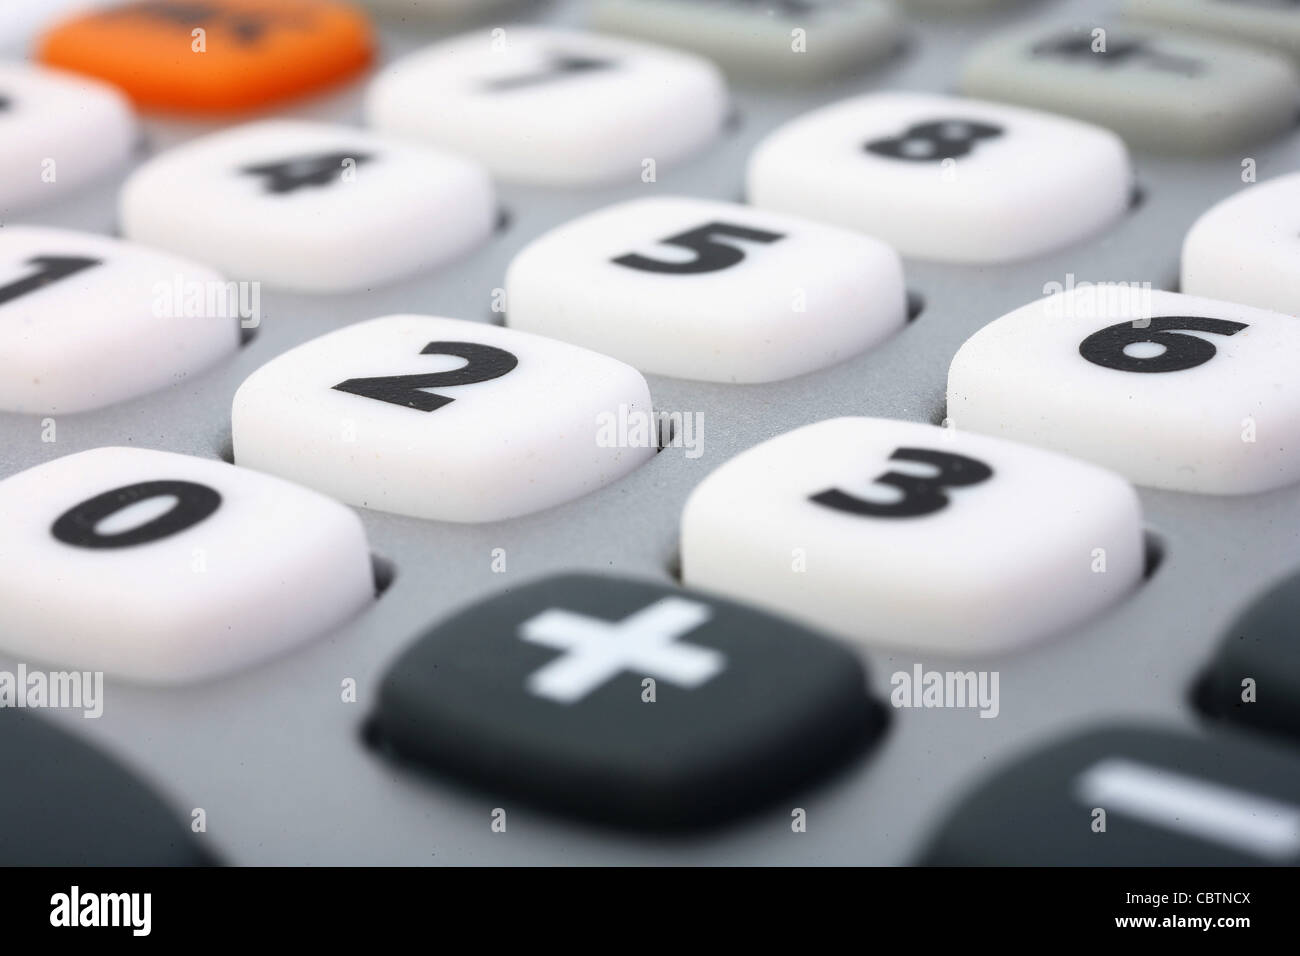 Rubber buttons on a calculator Stock Photo